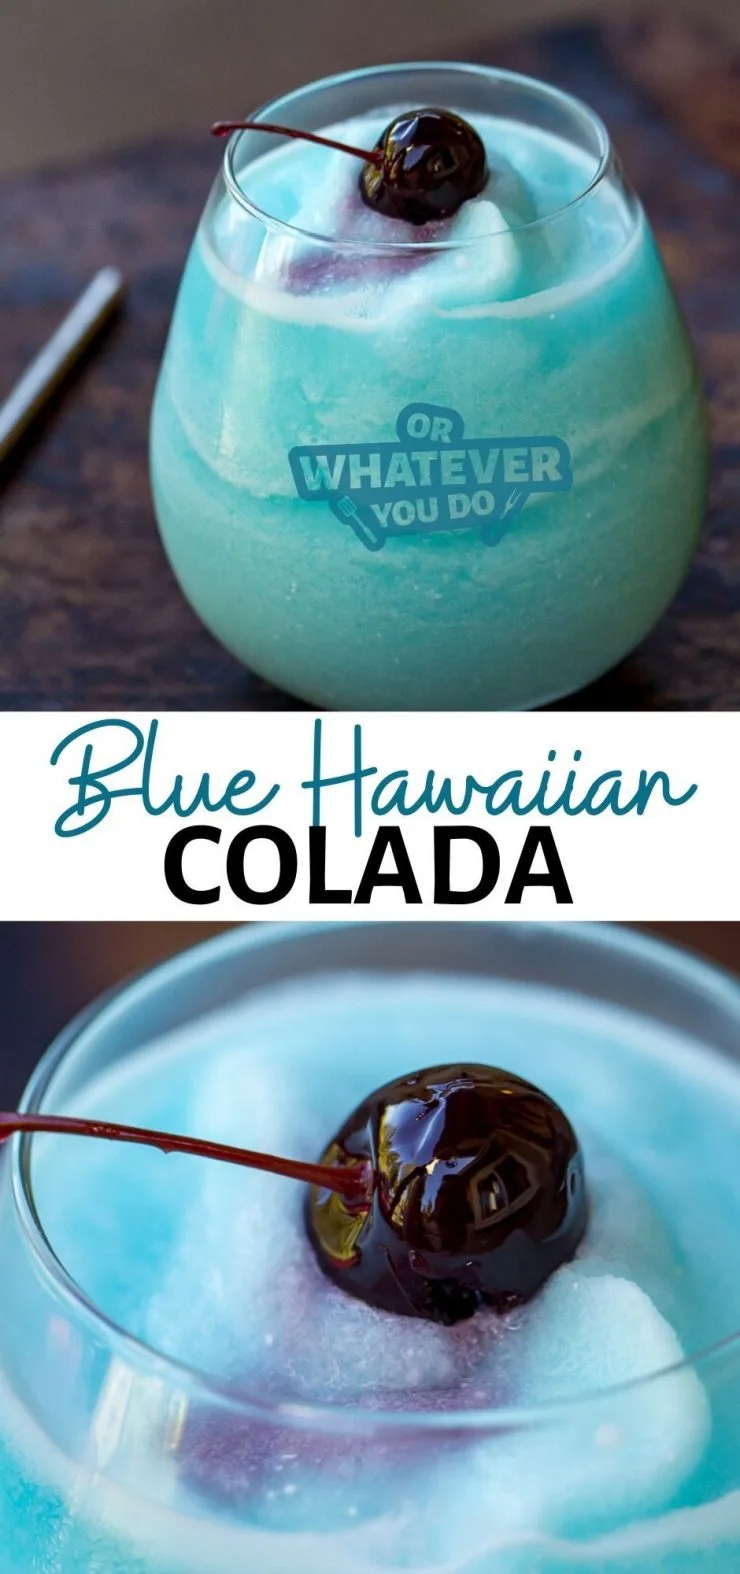 Blue Hawaiian Colada with text on the image that says the title